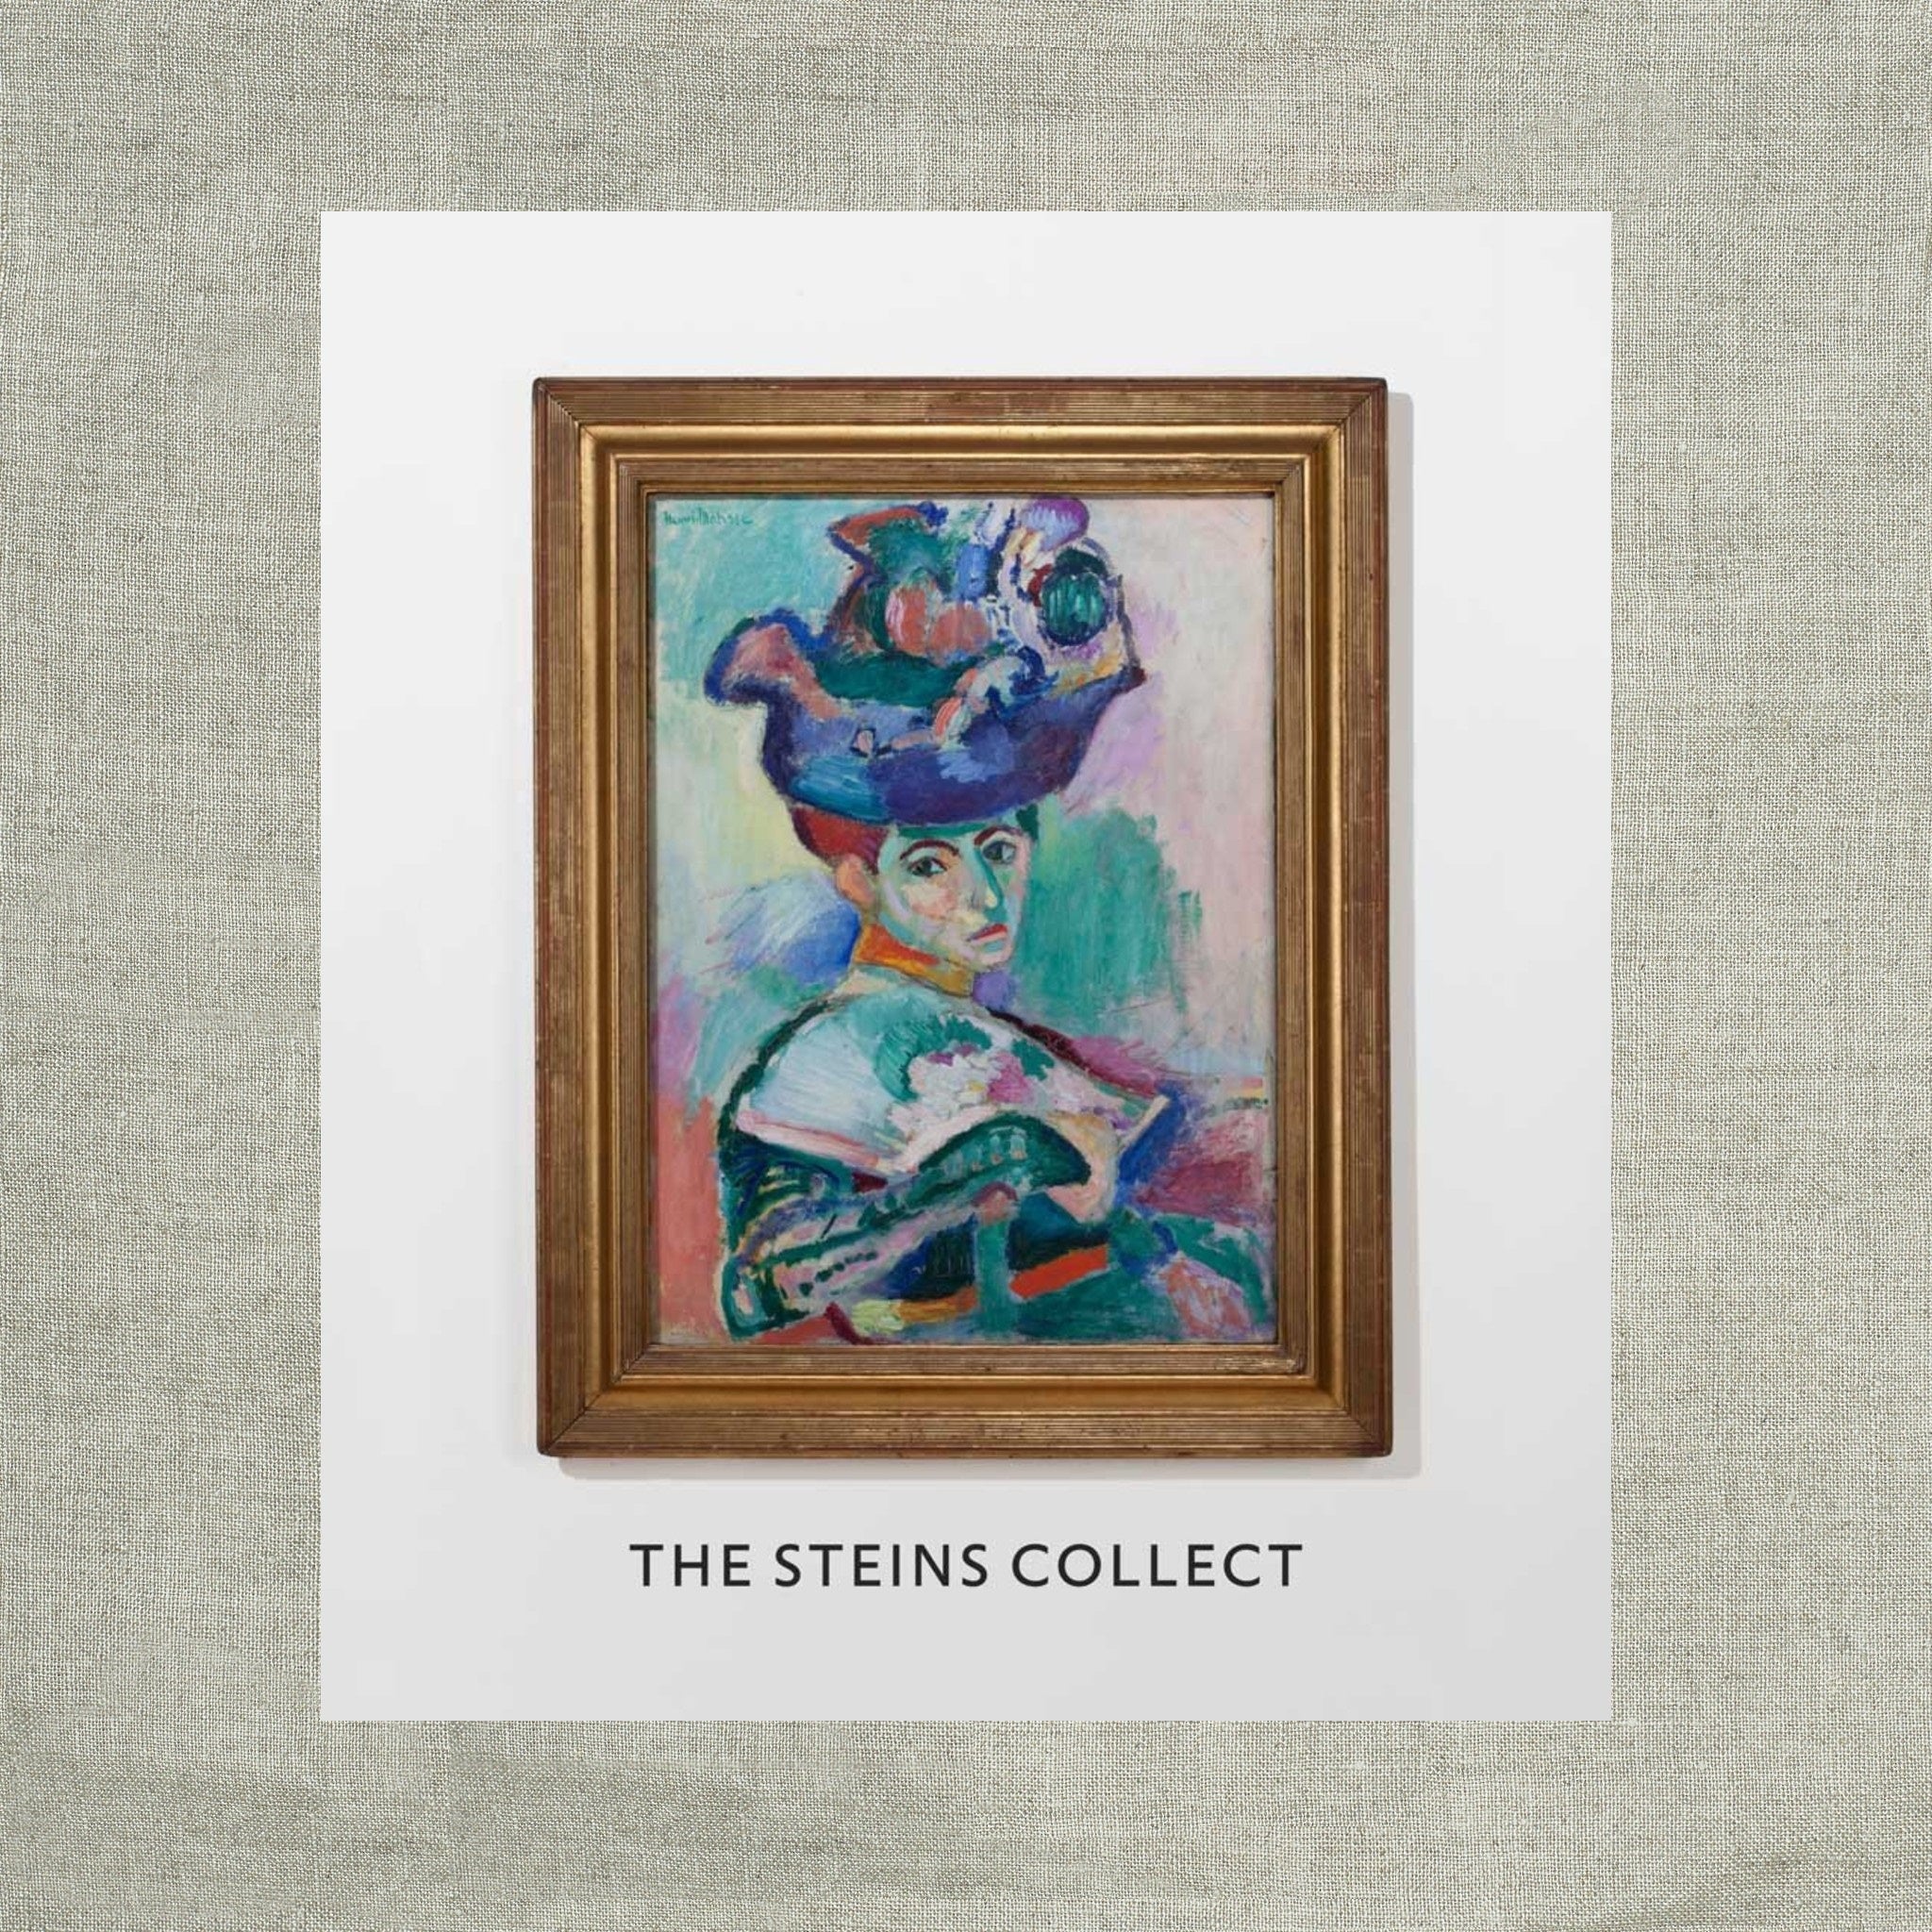 The Steins Collect: Matisse Picasso - The Store at Mia 